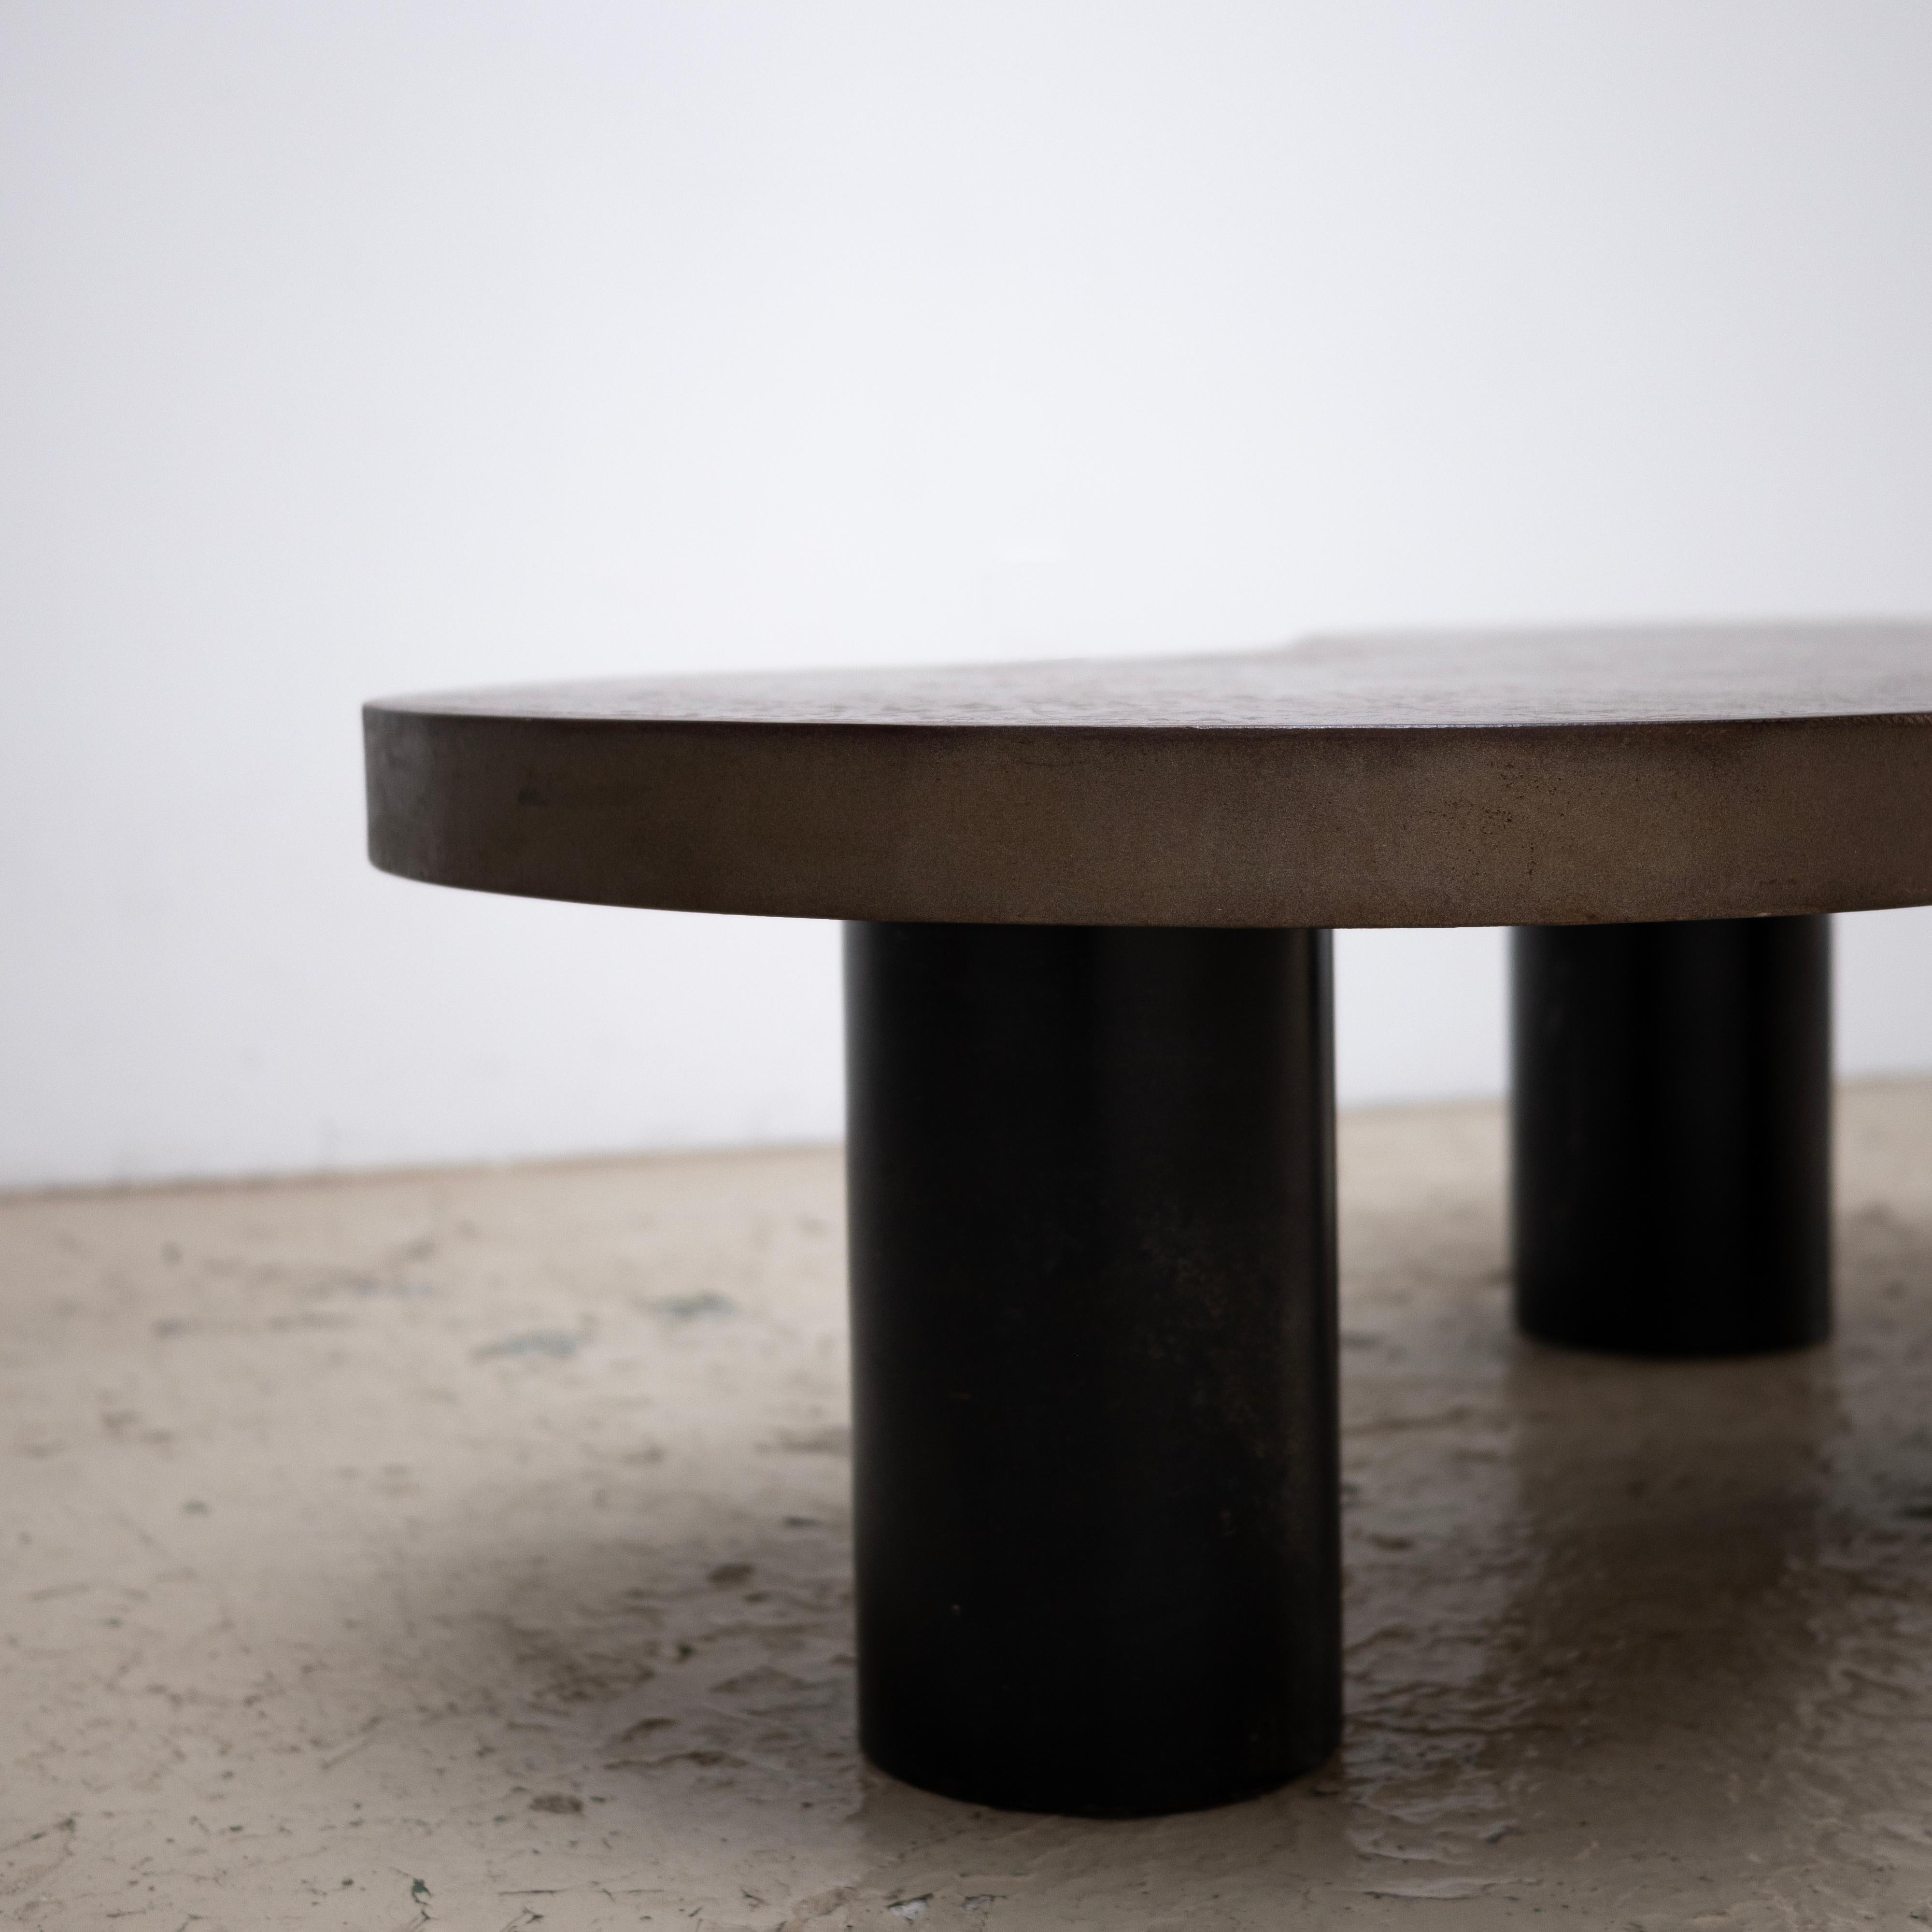 Designer's Flaque Coffee Table In Good Condition For Sale In Edogawa-ku Tokyo, JP